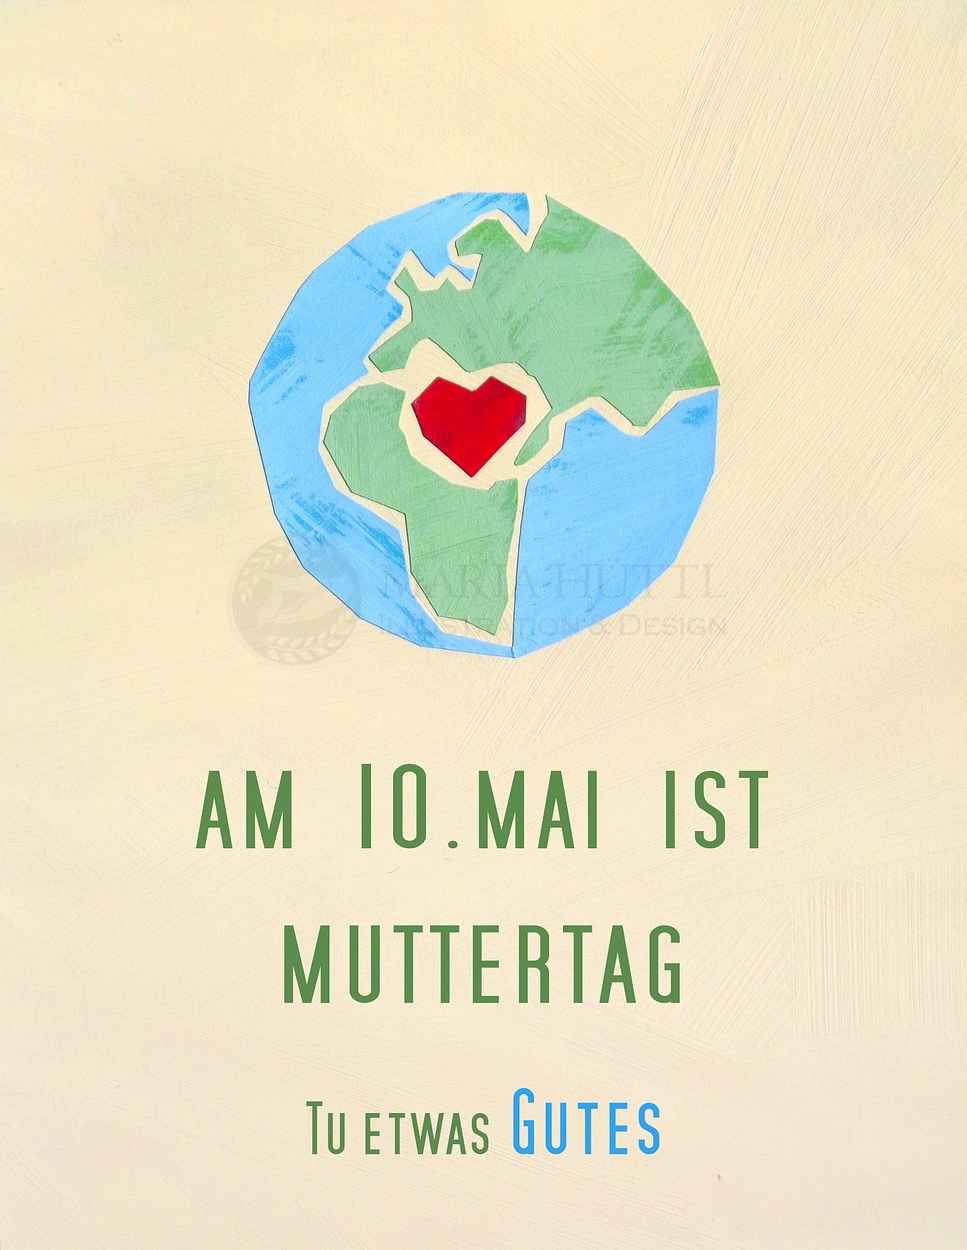 Muttertag (Mother's Day) 2020